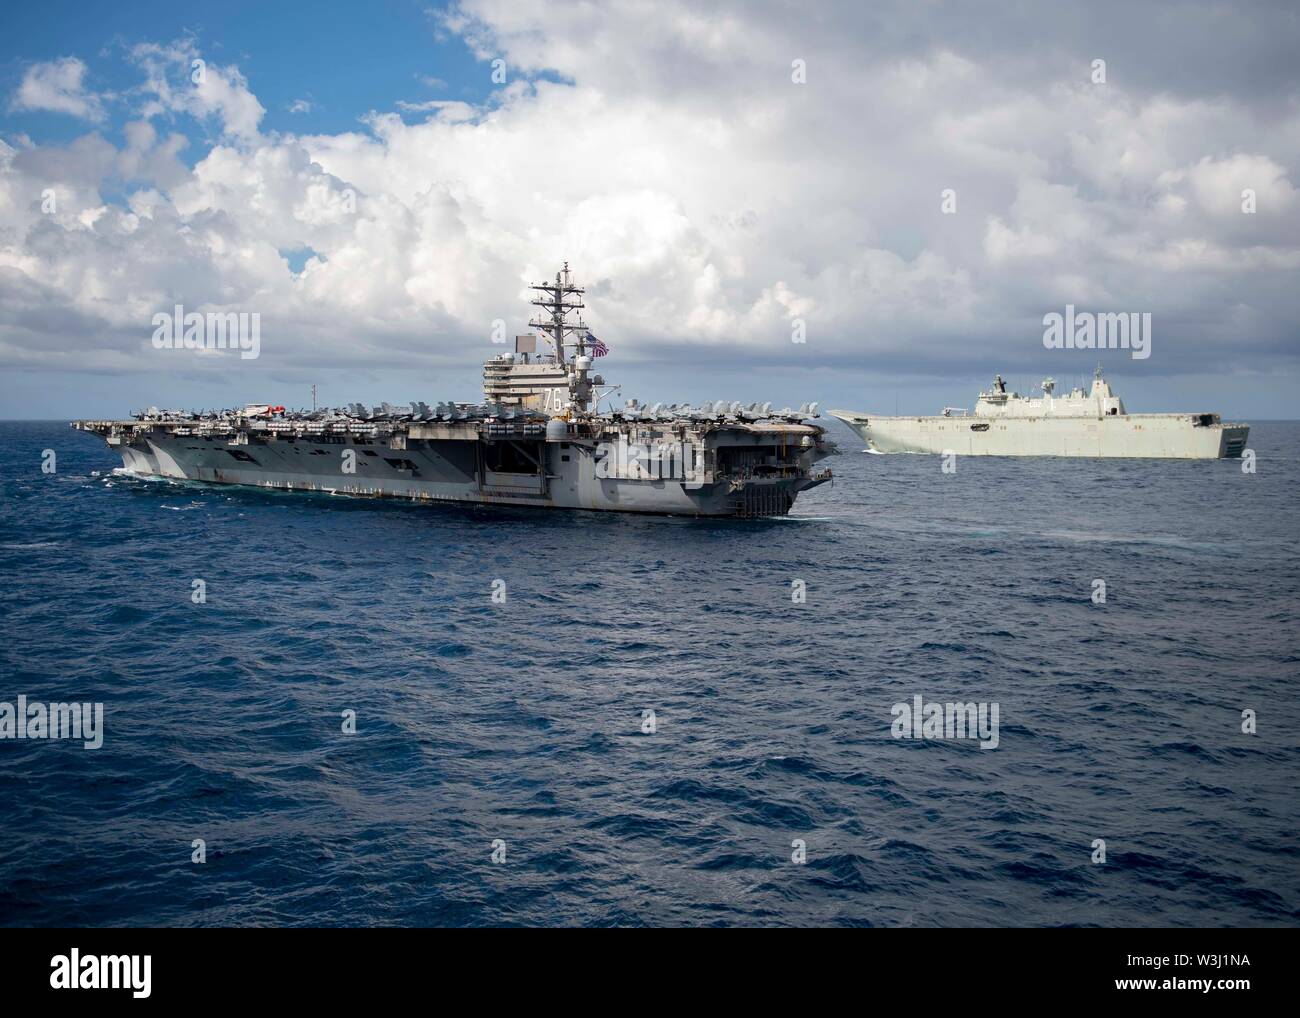 190711-N-WK982-3060 CORAL SEA (July 11, 2019) The U.S. Navy Nimitz-class aircraft carrier USS Ronald Reagan (CVN 76), left, and the Royal Australian Navy Canberra-class landing helicopter dock ship HMAS Canberra (L02) maneuver into formation during Talisman Sabre 2019. Talisman Sabre 2019 illustrates the closeness of the Australian and U.S. alliance and the strength of the military-to-military relationship. This is the eighth iteration of this exercise. (U.S. Navy photo by Mass Communication Specialist 2nd Class John Harris/Released) Stock Photo